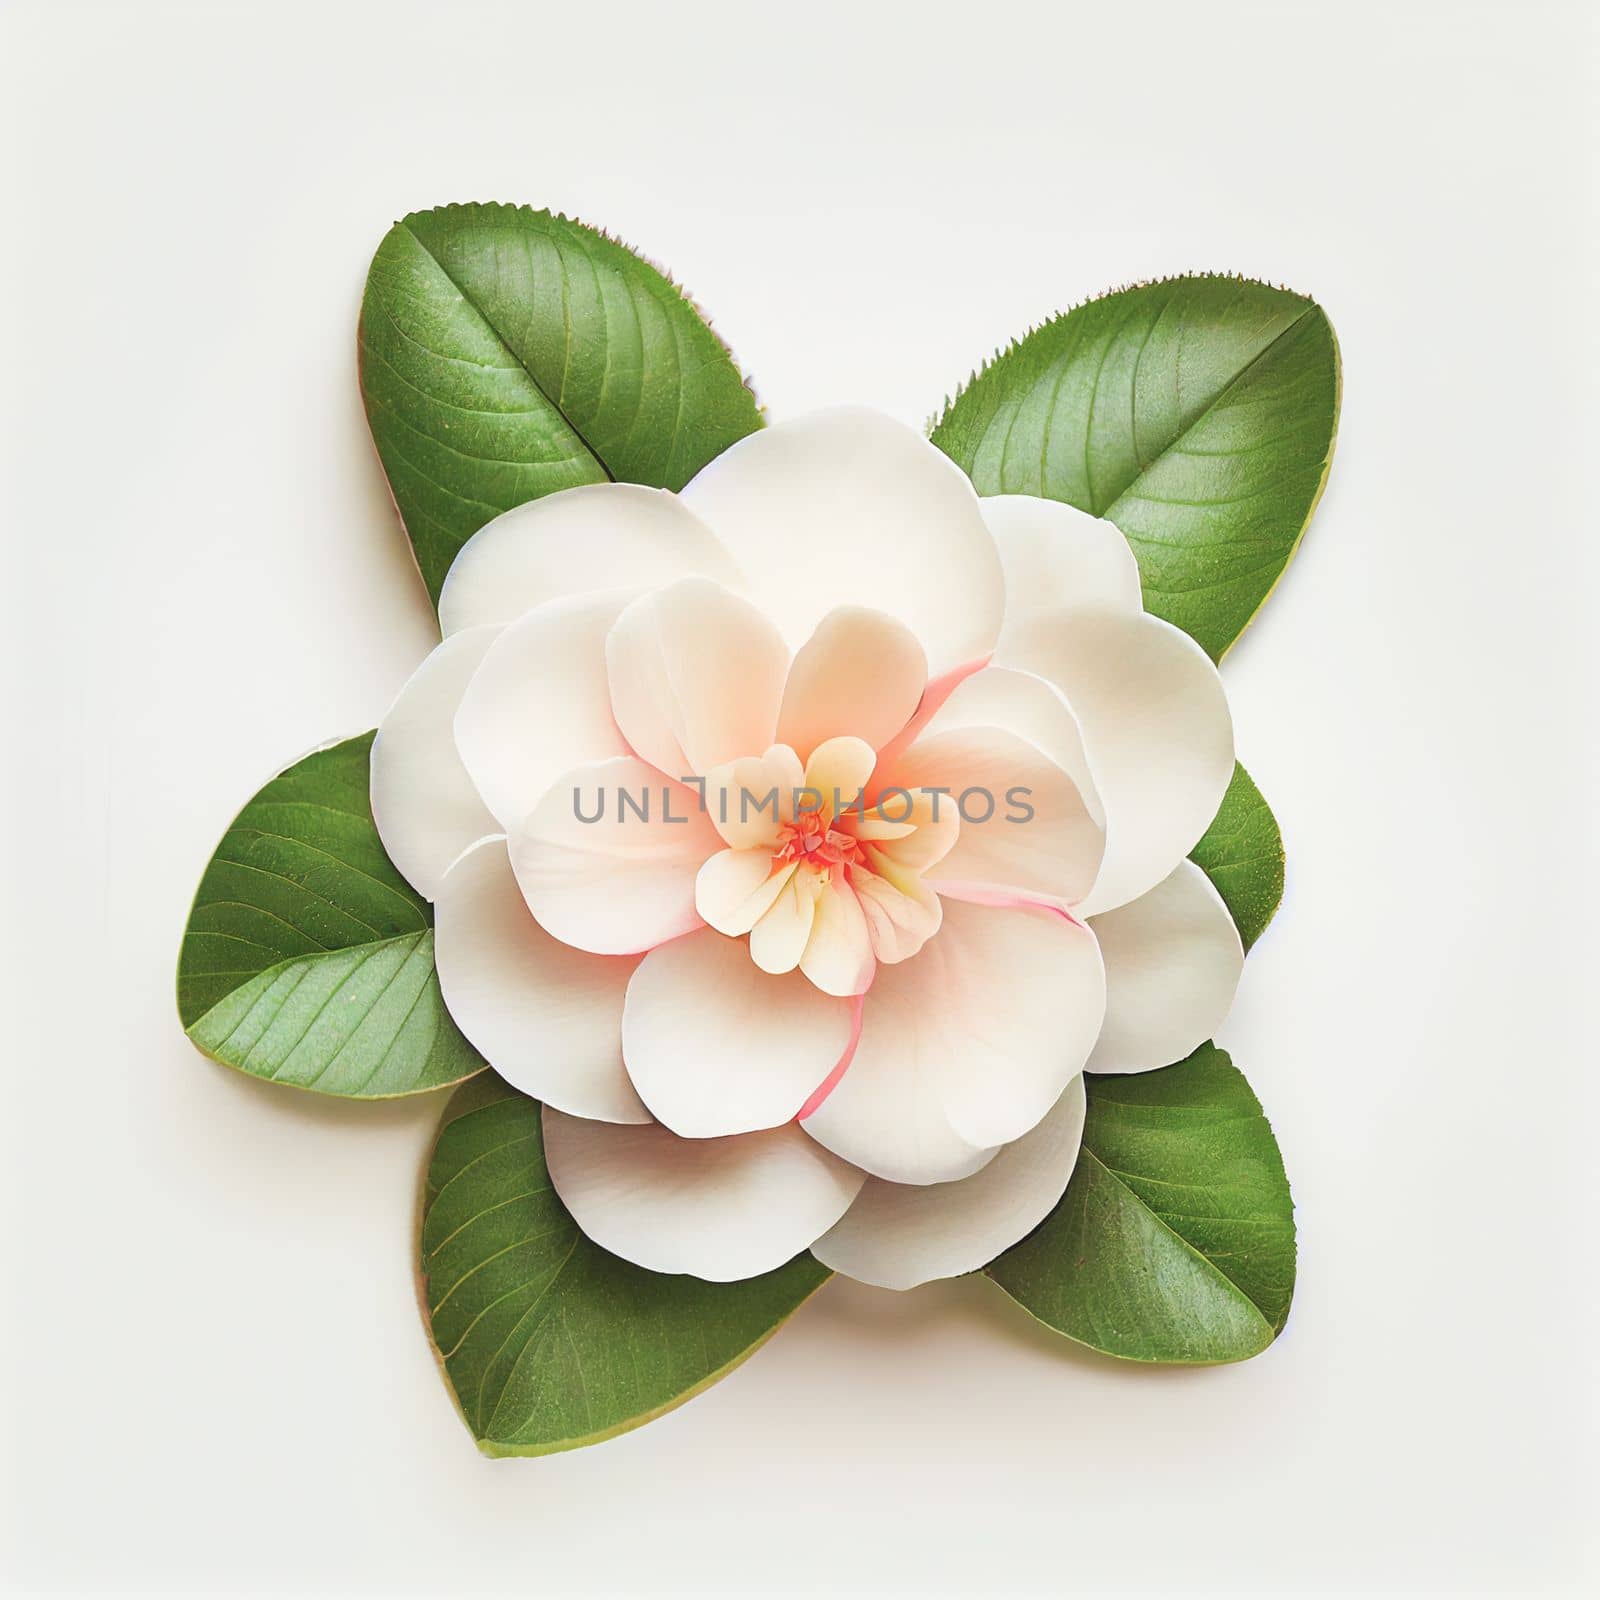 Camellia flower in a top view, isolated on a white background, suitable for use on Valentine's Day cards, love letters, or springtime designs.